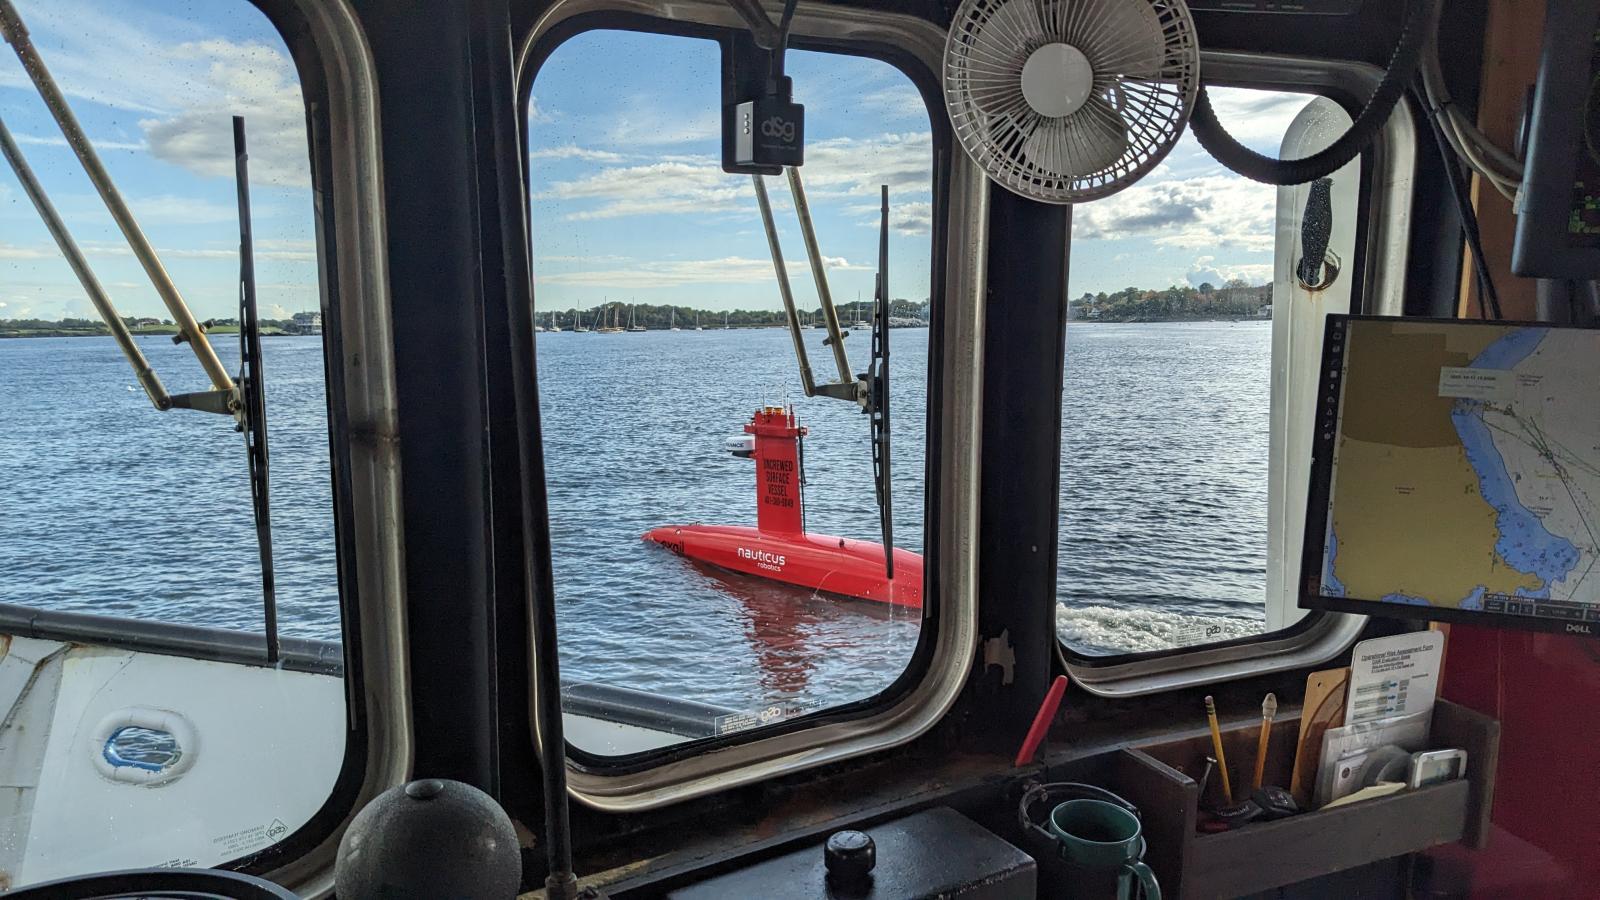 USV performs ‘first-of-its-kind’ fisheries research survey at US offshore wind sites